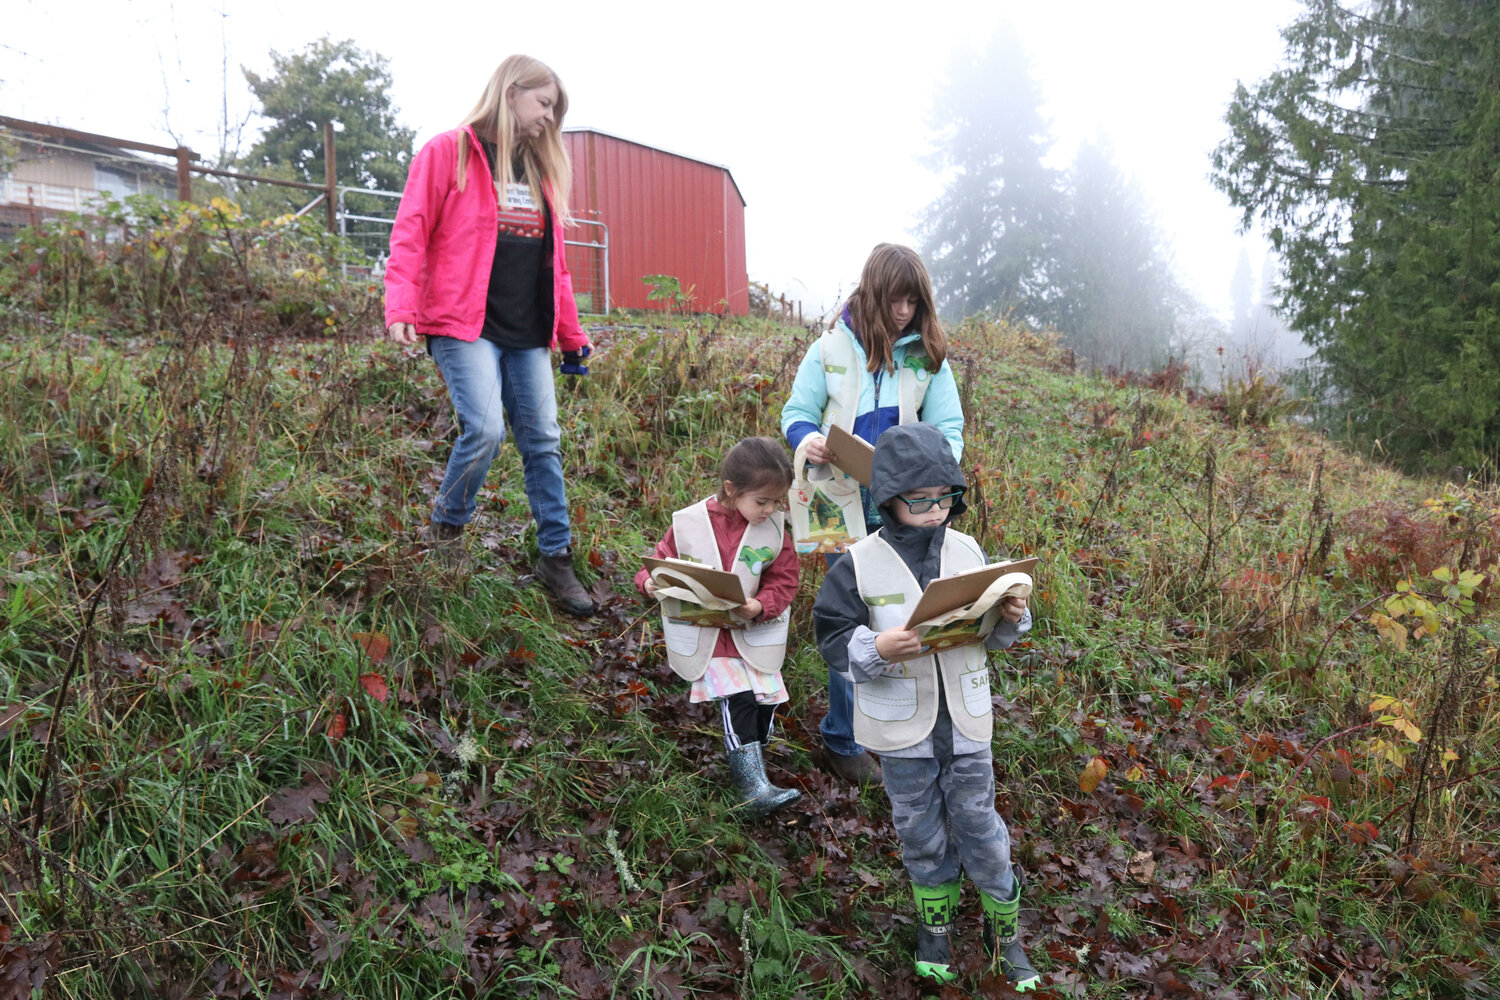 Sweet Tomatoes Learning Center Executive Director Kathleen Reed leads students on a nature hike on the center’s property in Chehalis on Wednesday, Dec. 6.